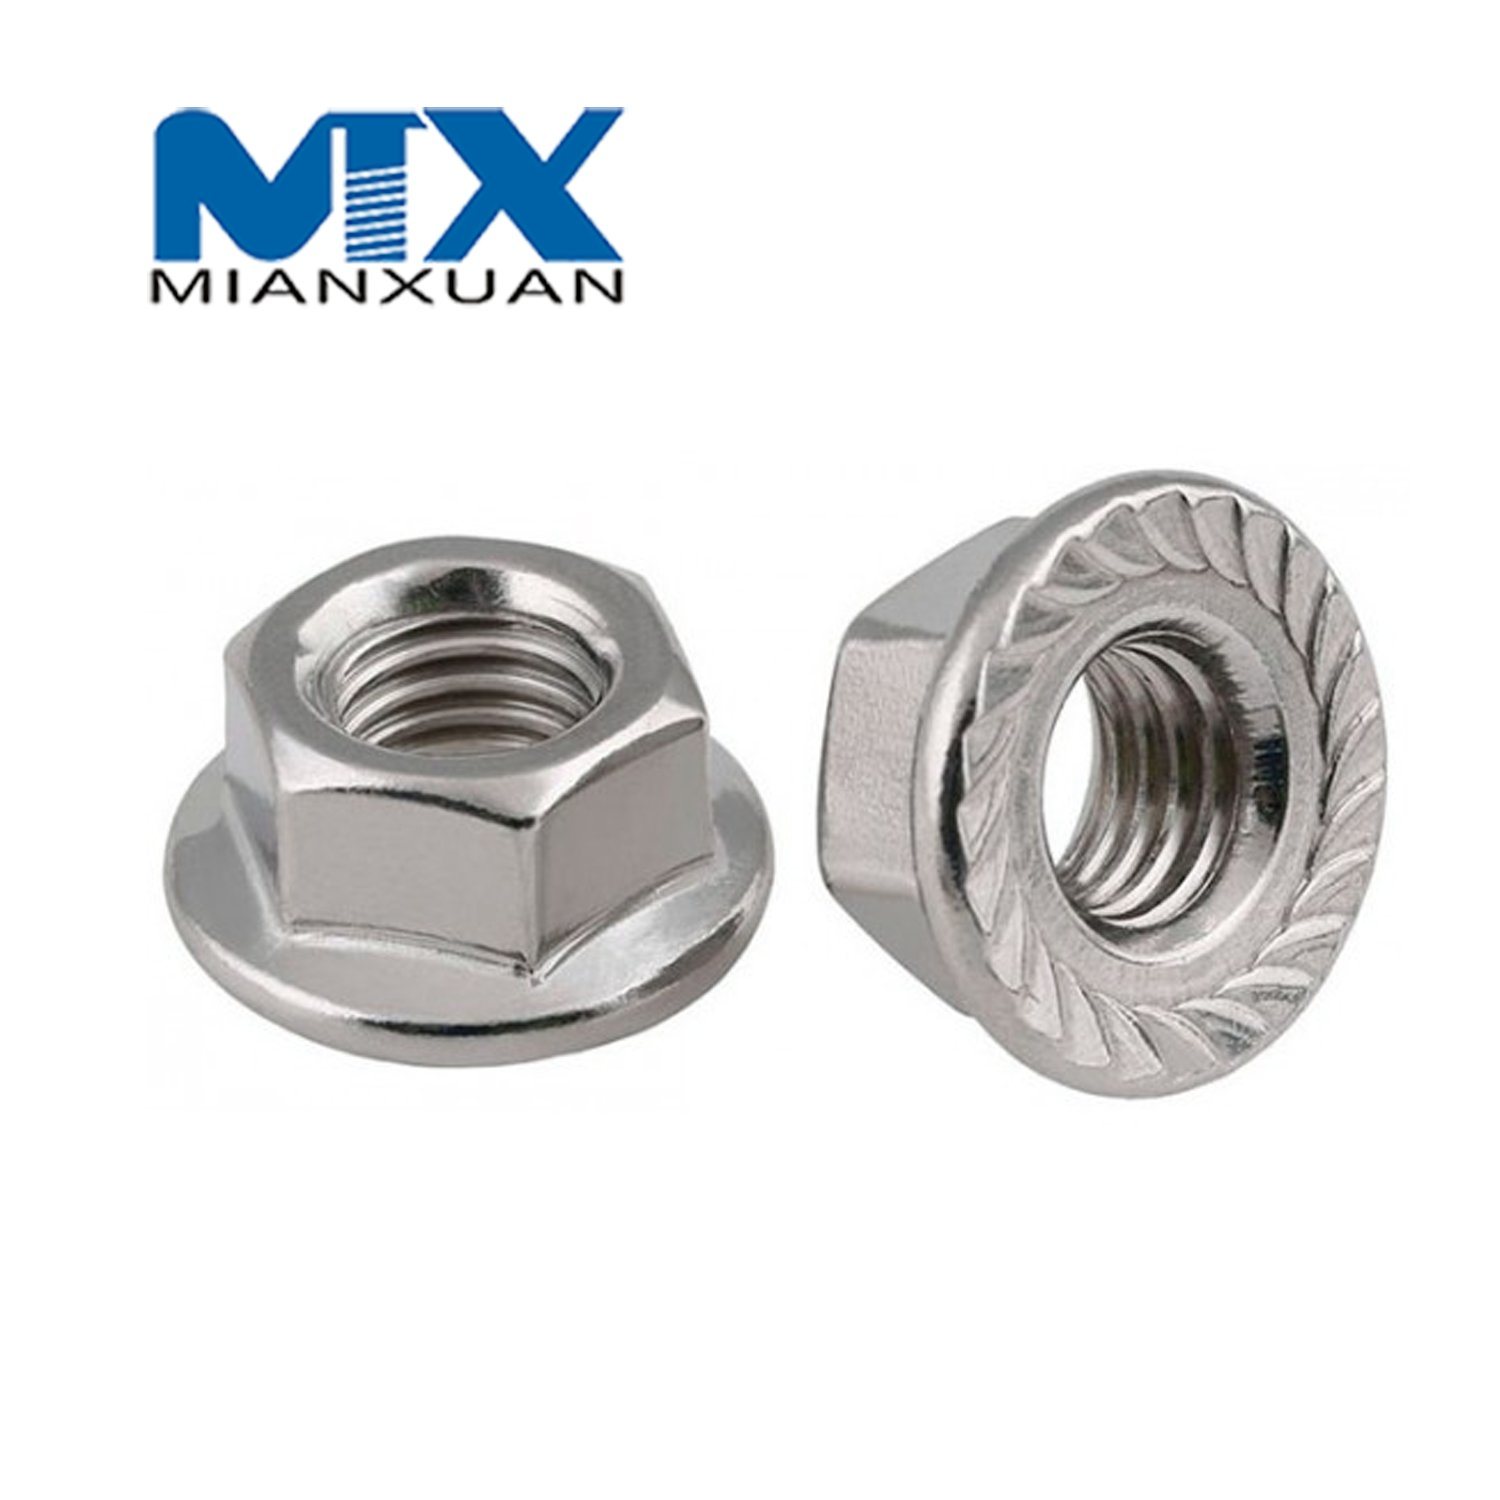 ANSI ASME Hex Nut Flange with Knurled No-Knurled